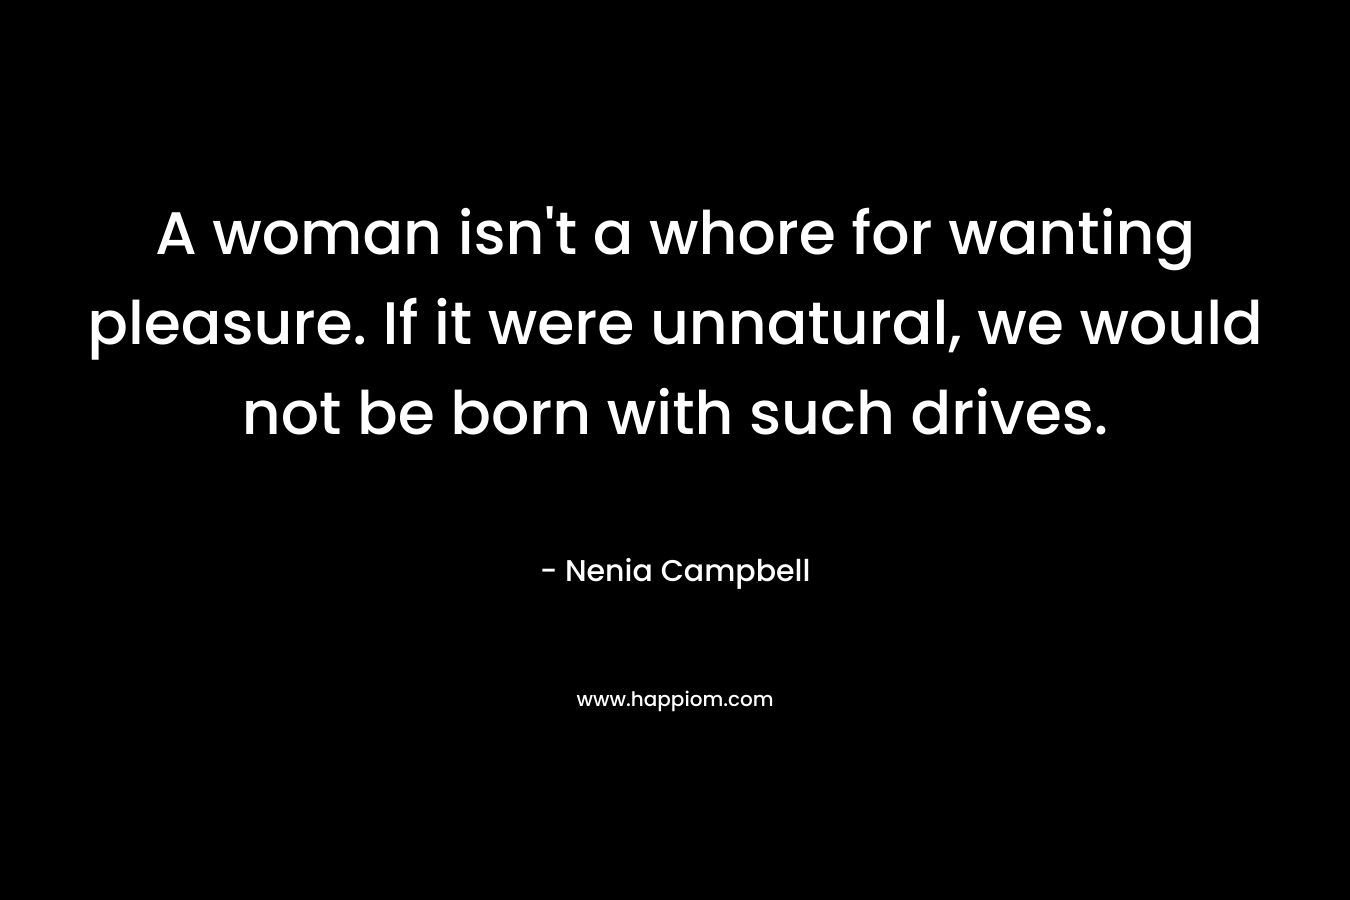 A woman isn't a whore for wanting pleasure. If it were unnatural, we would not be born with such drives.